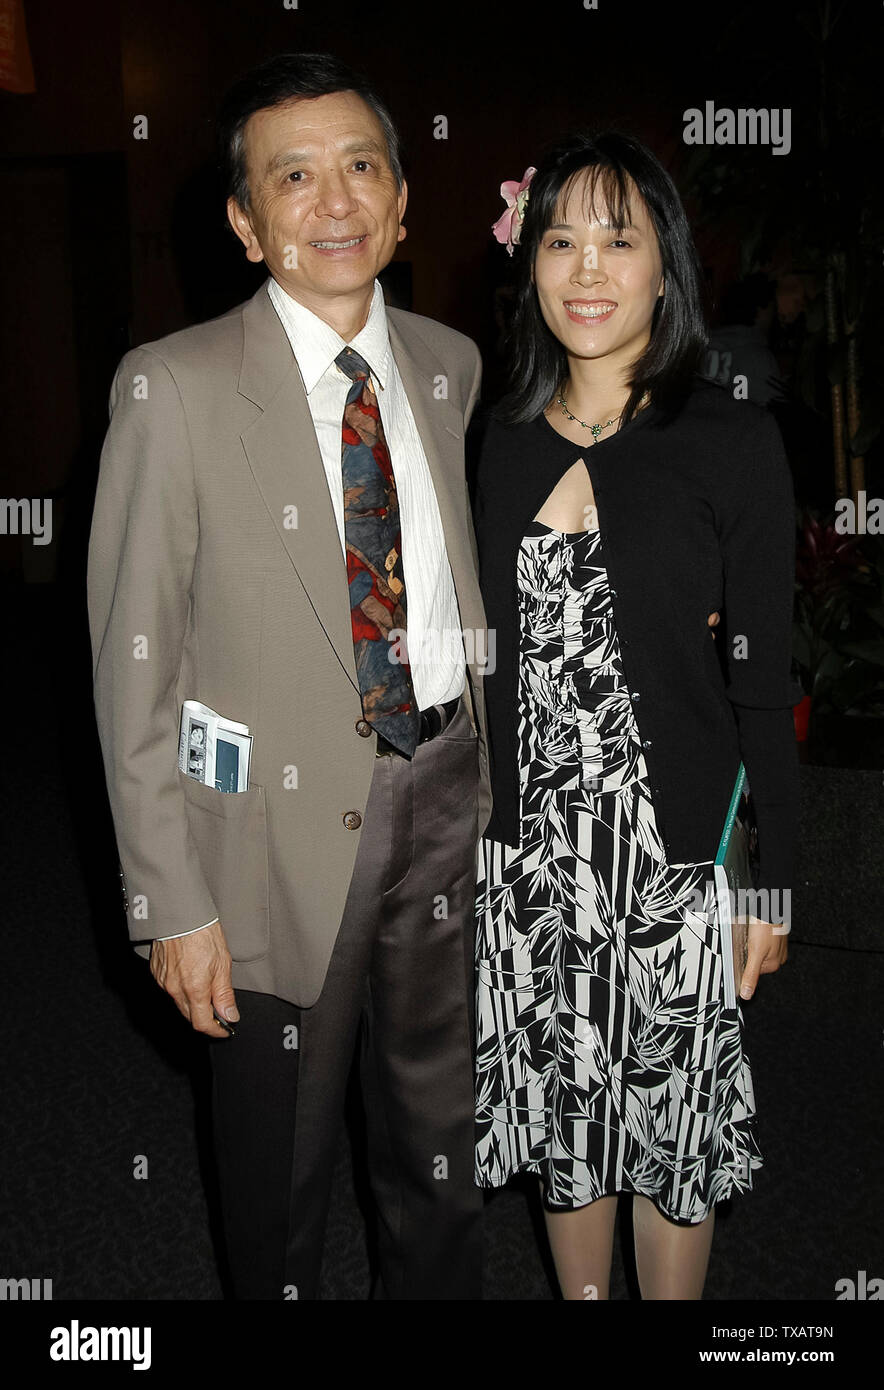 James Hong & daughter April Hong at the VCFilmFest 2004, The 20th LA Asian Pacific Film Festival - Opening Night Gala at the Directors Guild of America in West Hollywood, CA. The event took place on Thursday, April 29, 2004. Photo by: SBM / PictureLux  -  File Reference # 33790-4161SMBPLX Stock Photo